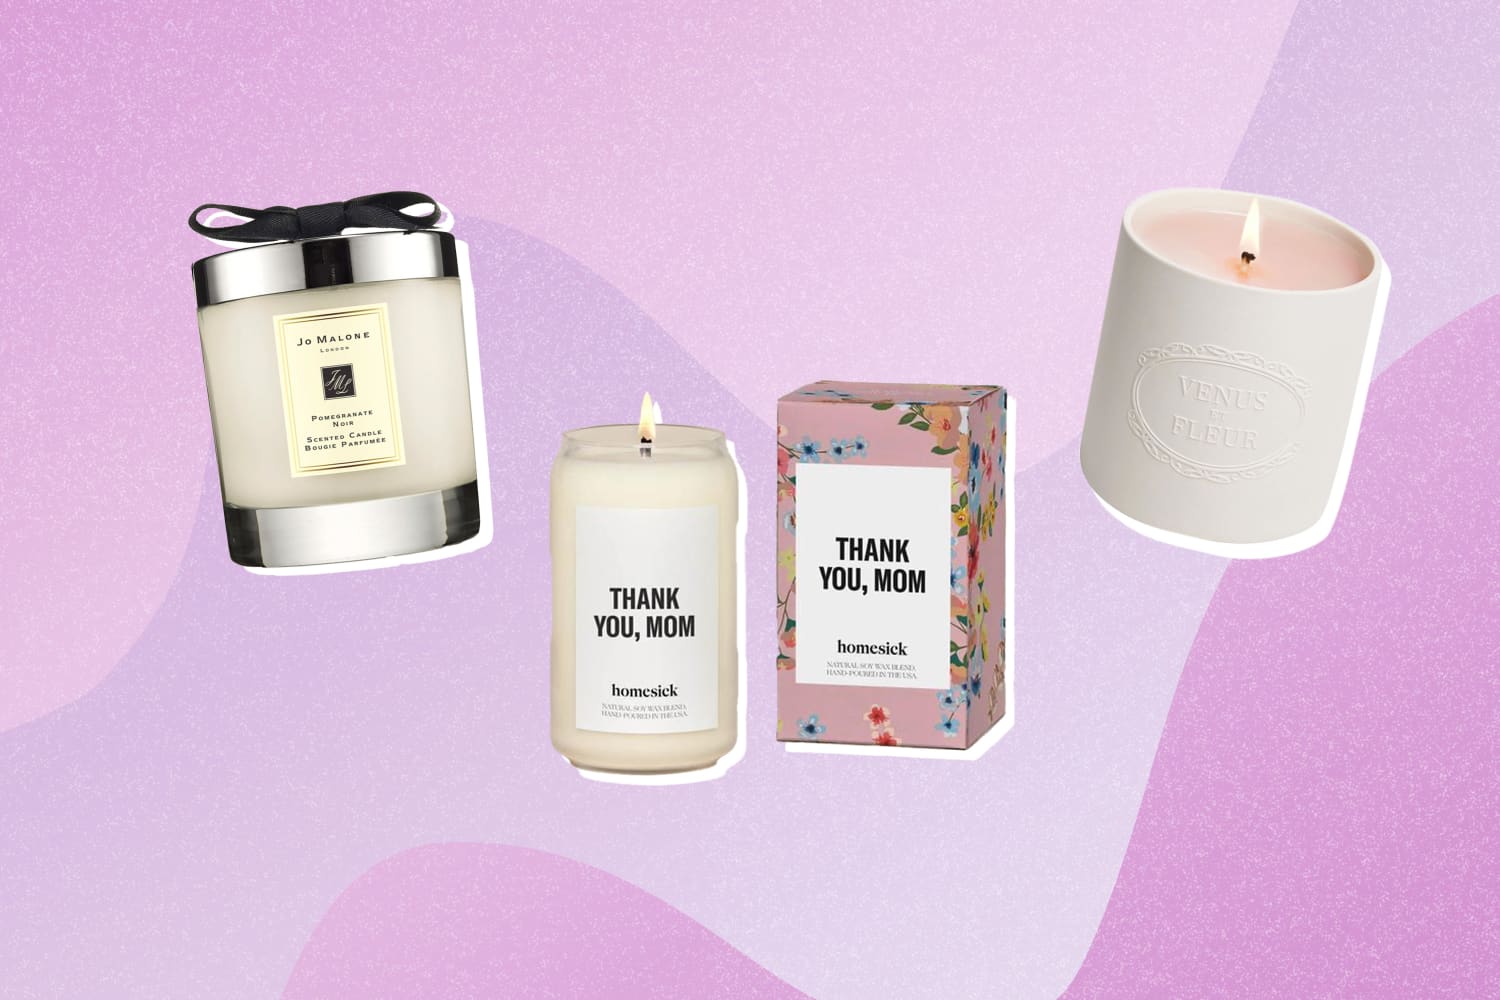 TOP 10 MUST-HAVE Mother's Day Candle Scents! #candles #diy #candlemaking 